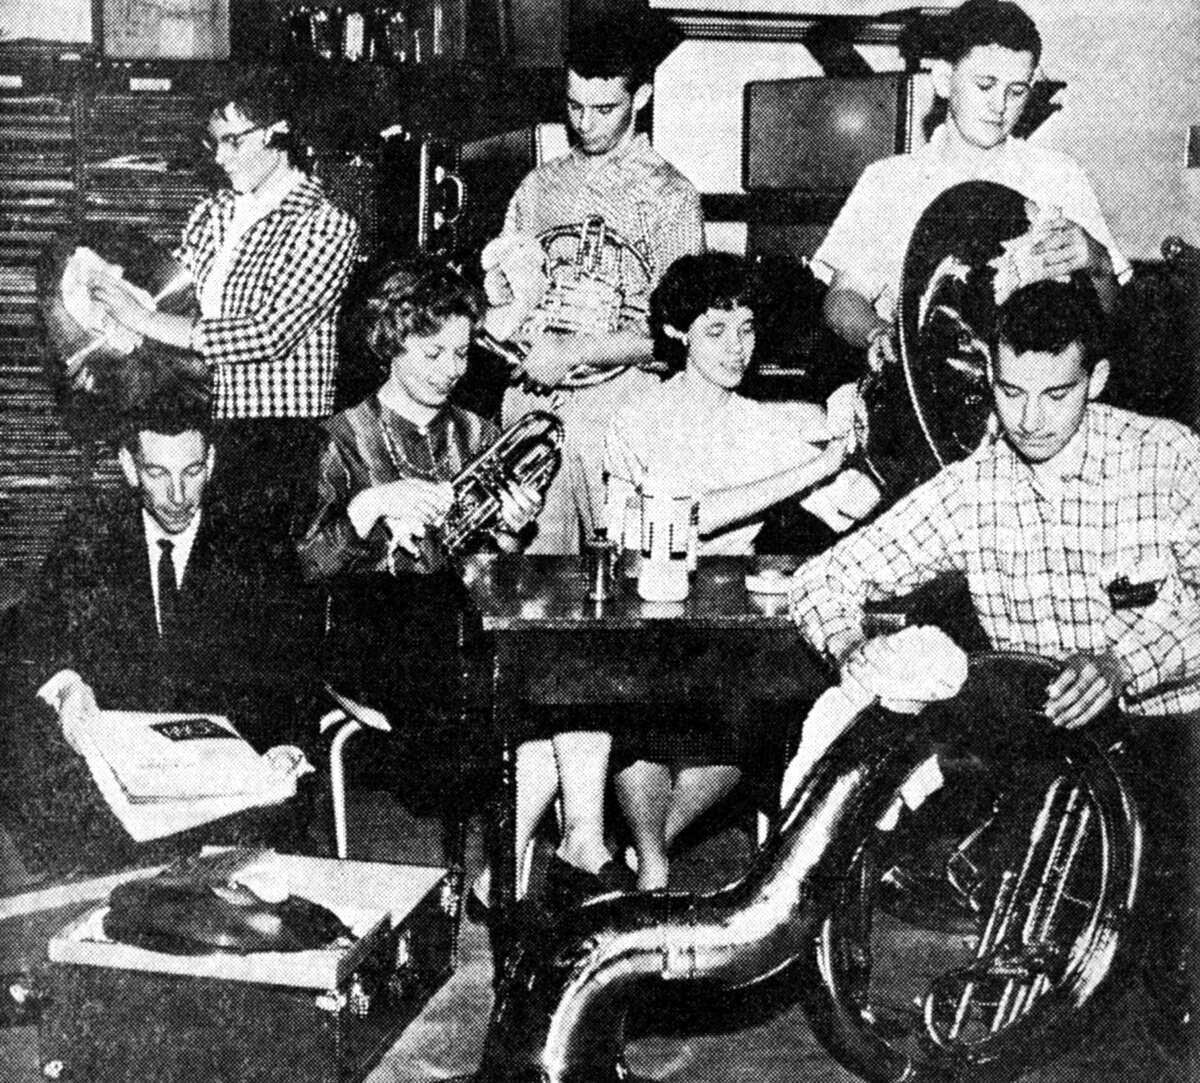 Some of the 75 musicians in the Manistee High School band go over their horns with polishing cloths as band Director Paul Cramer sorts the sheet music the band is set to play in today's performance. (From left, front row) Cramer, Lynette Raatz, Susan Rosenow and Randy Steffens. (From left, standing) Colleen Haynes, Dave Chambers and John Zawacki. The photo was published in the News Advocate on April 28, 1962.